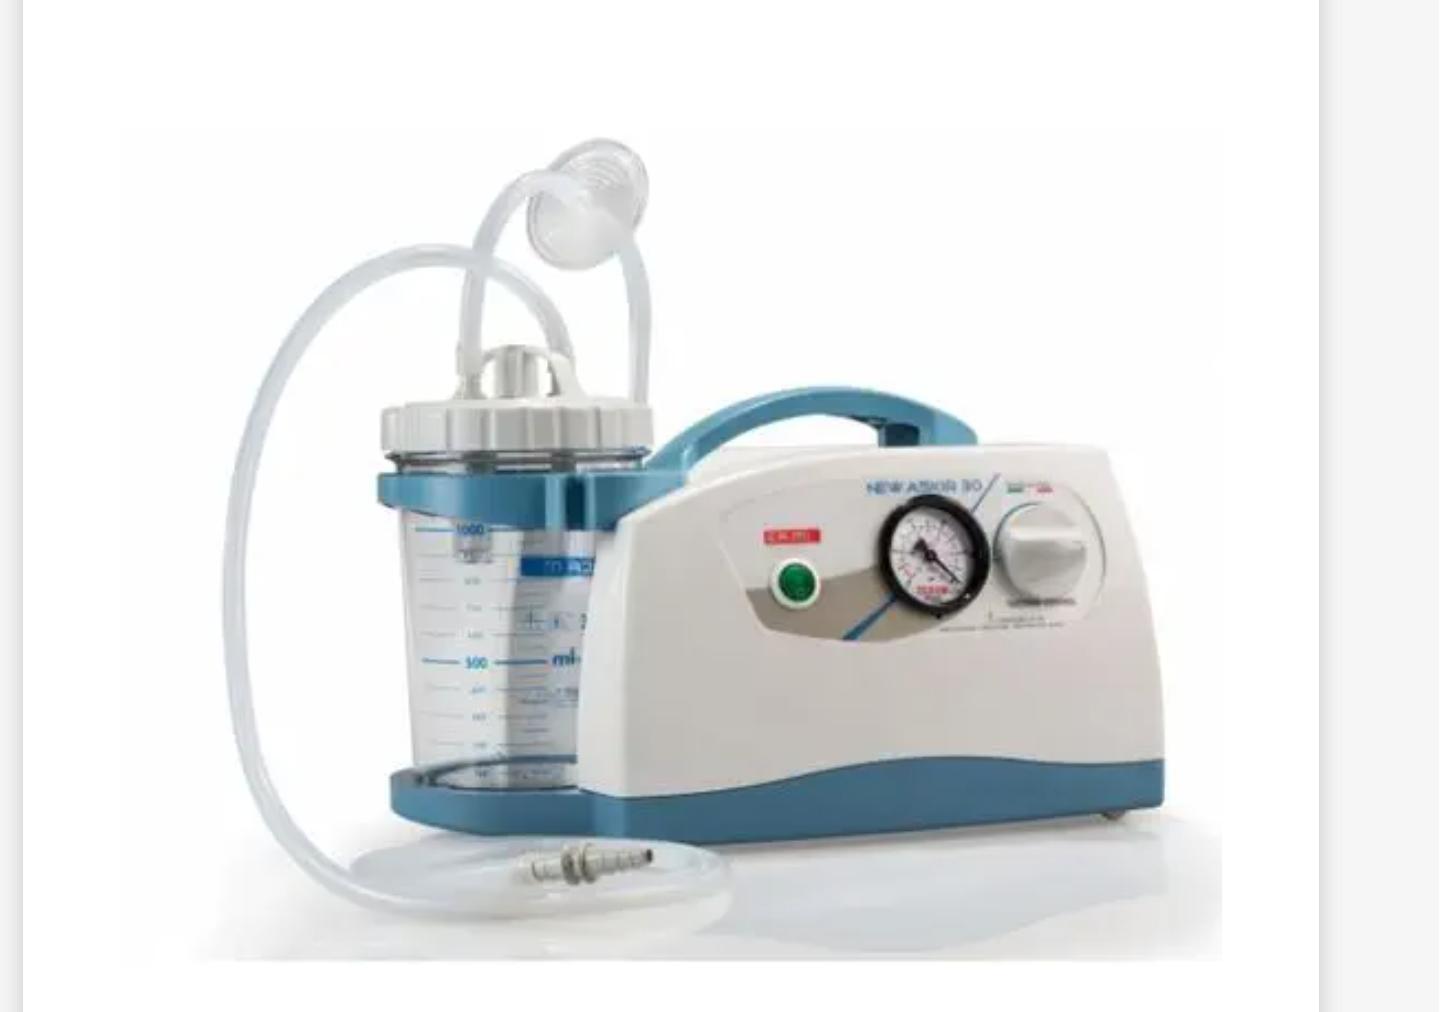 Electrical Surgical Suction Pump New Askir 30